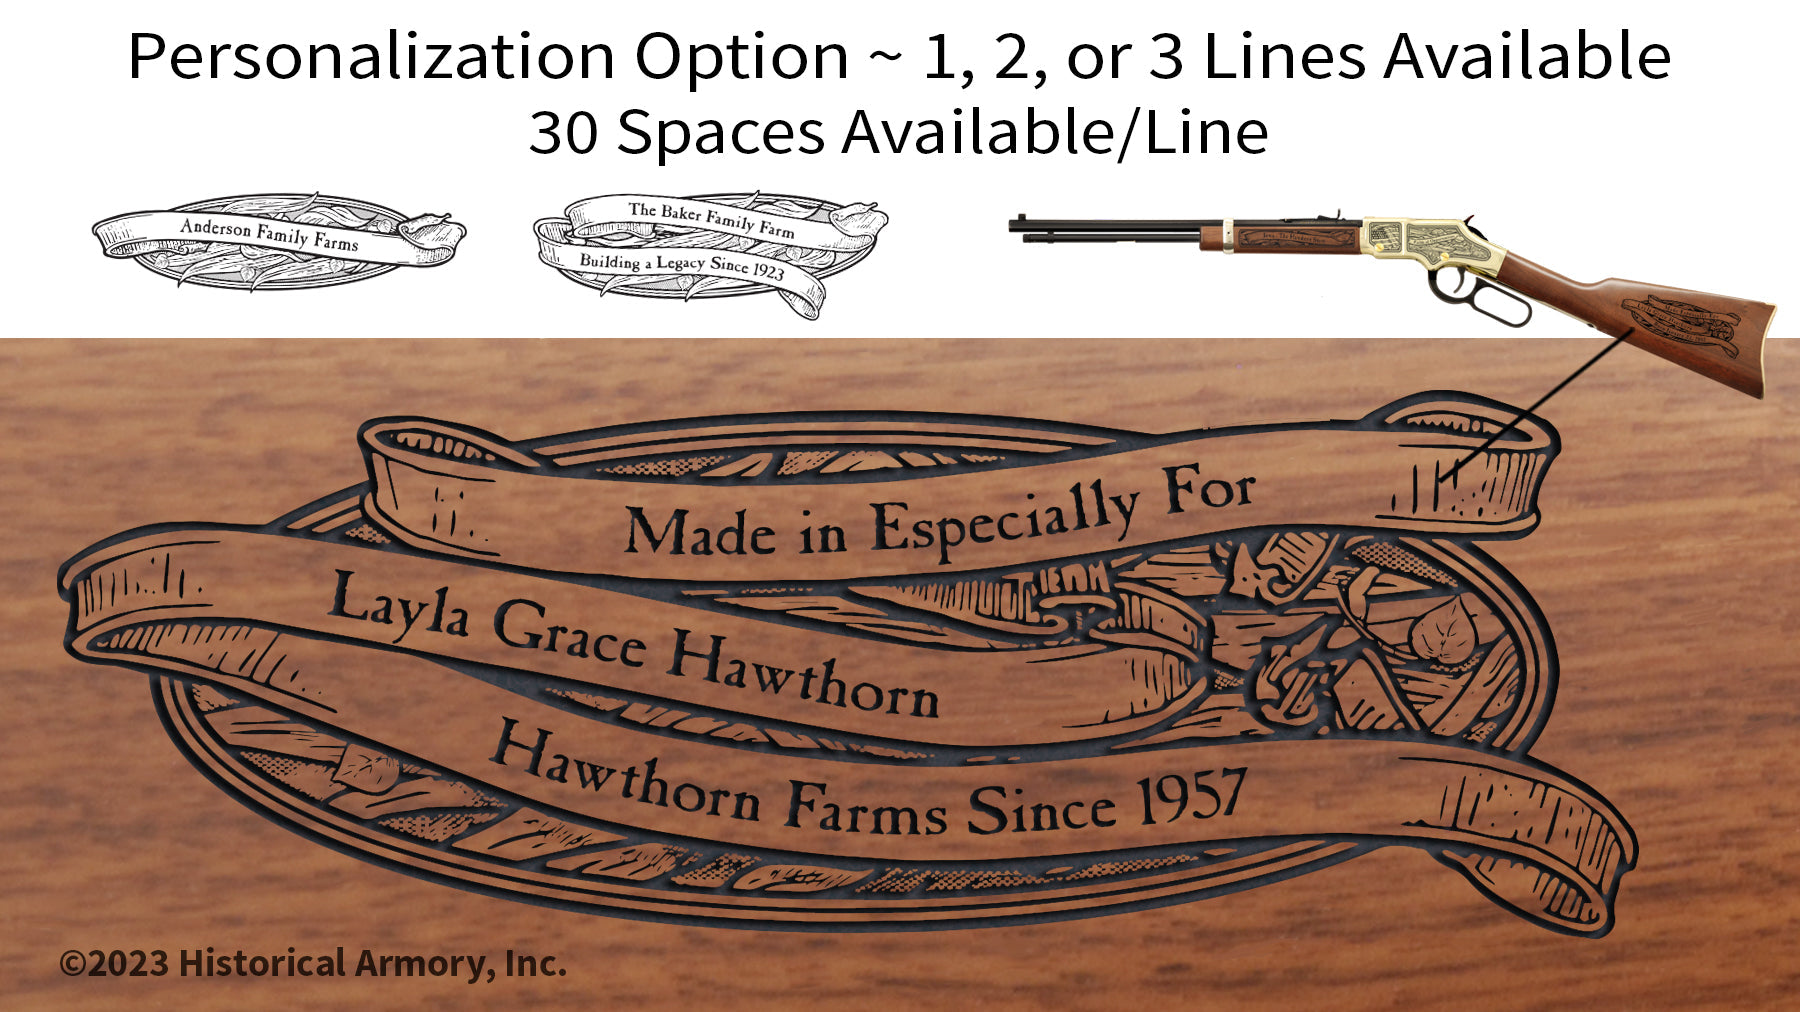 Pennsylvania Agricultural Heritage Engraved Rifle Personalization